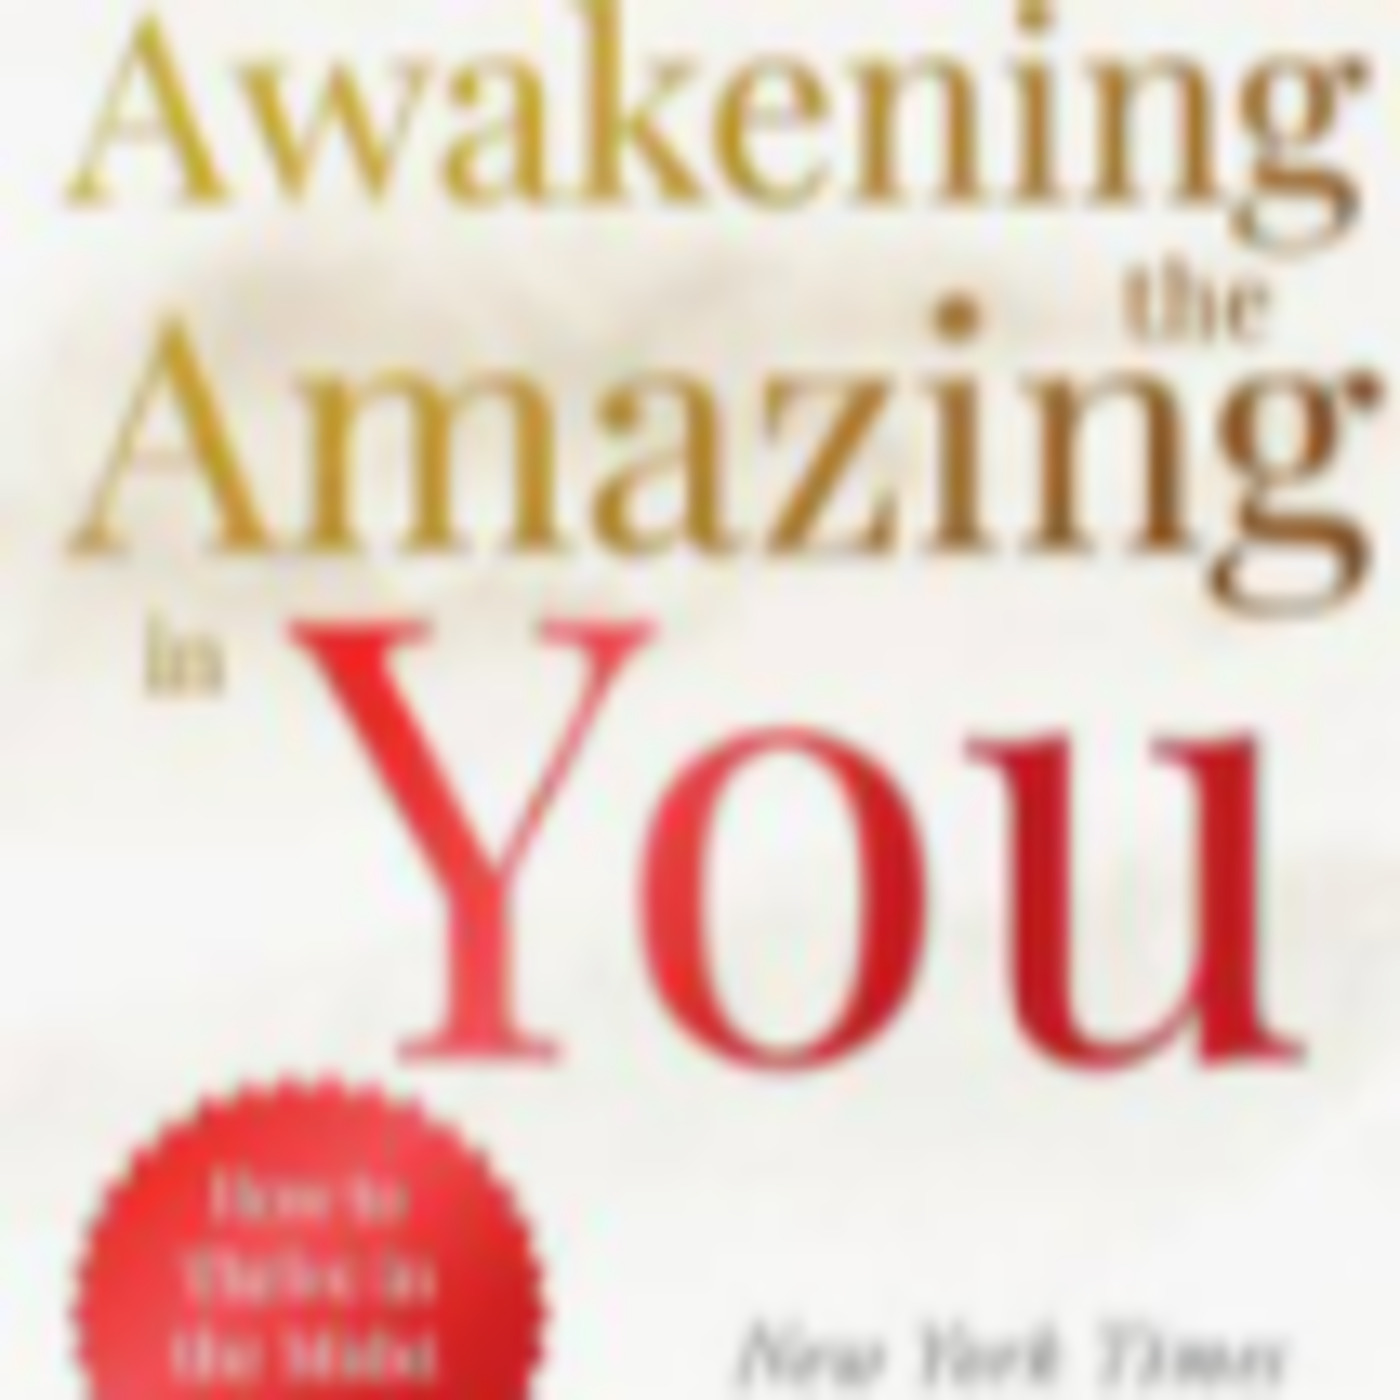 Episode 2474: Janet Bray Attwood  ~ 2x New York Times Bestselling Author of ”Awakening the Amazing in You: How to Thrive in the Midst of Chaos” & ”The Passion Test”